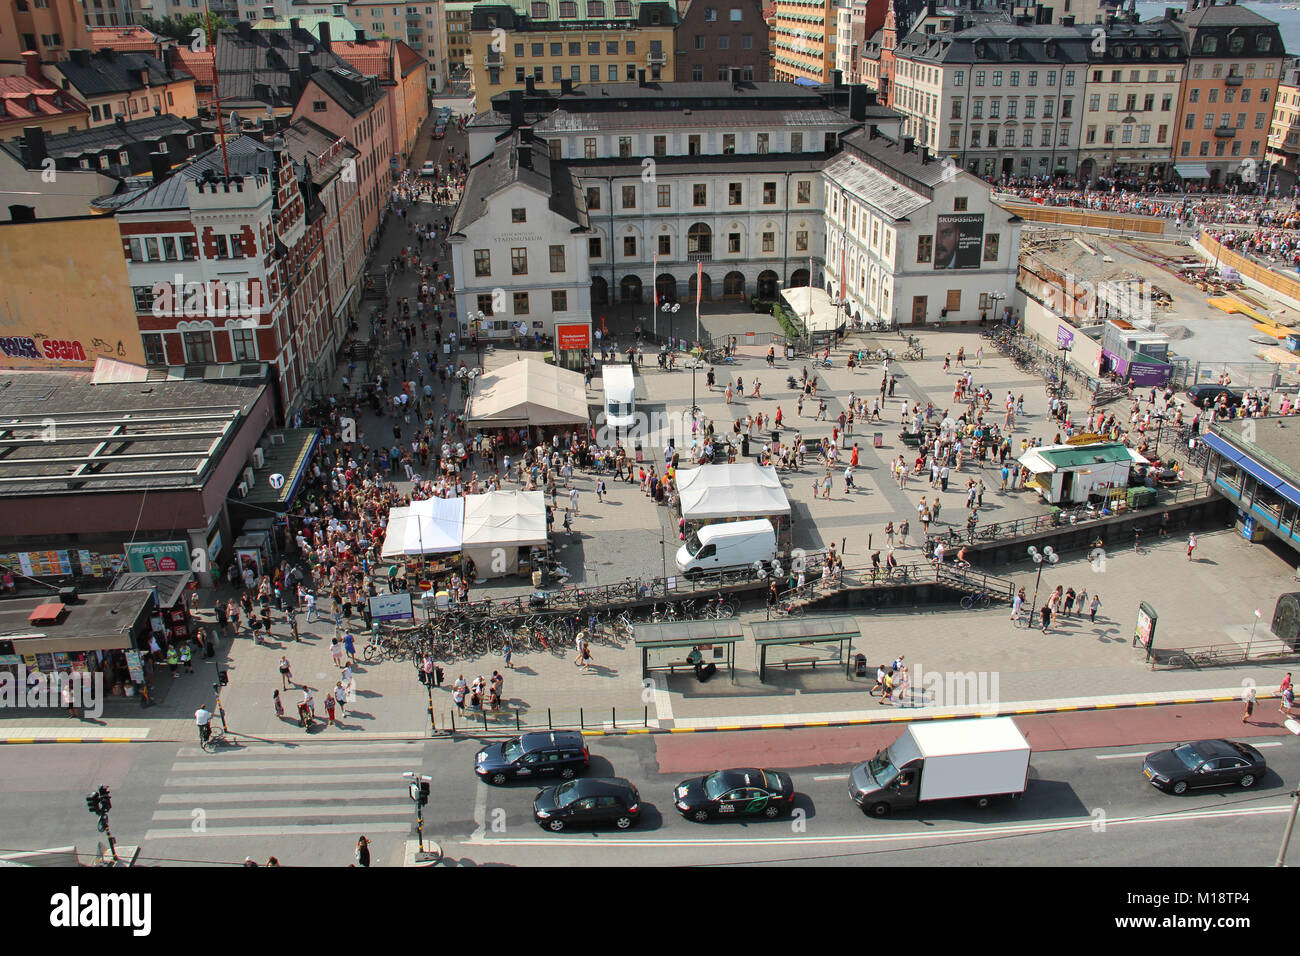 The Stockholm City Museum at Slussen, seen from Katarinahissen, on August 2, 2014, during the Pride Parade. Stock Photo